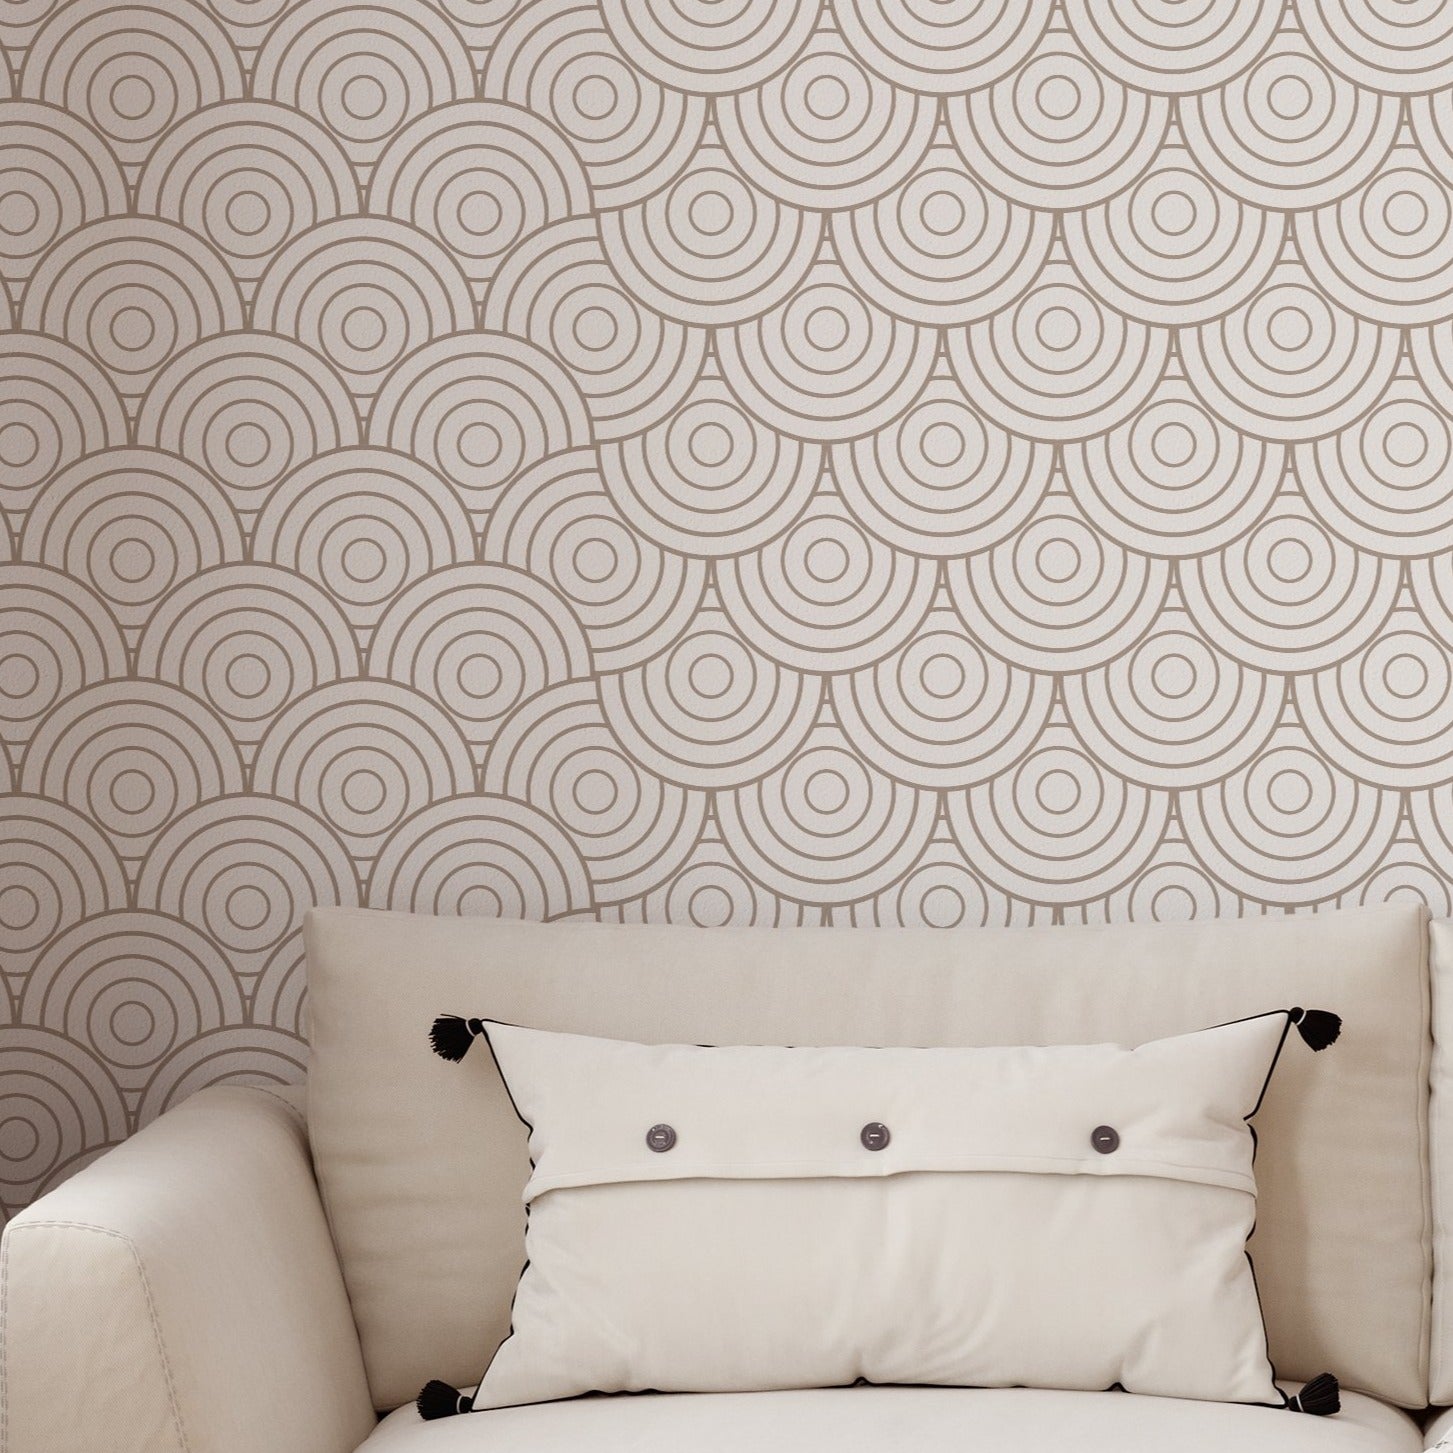 A contemporary living space is enhanced by the Geometric Japanese Wallpaper, featuring a repeating pattern of beige concentric circles with a minimalist aesthetic. The design is reminiscent of traditional Japanese motifs and adds a tranquil, harmonious feel to the room.